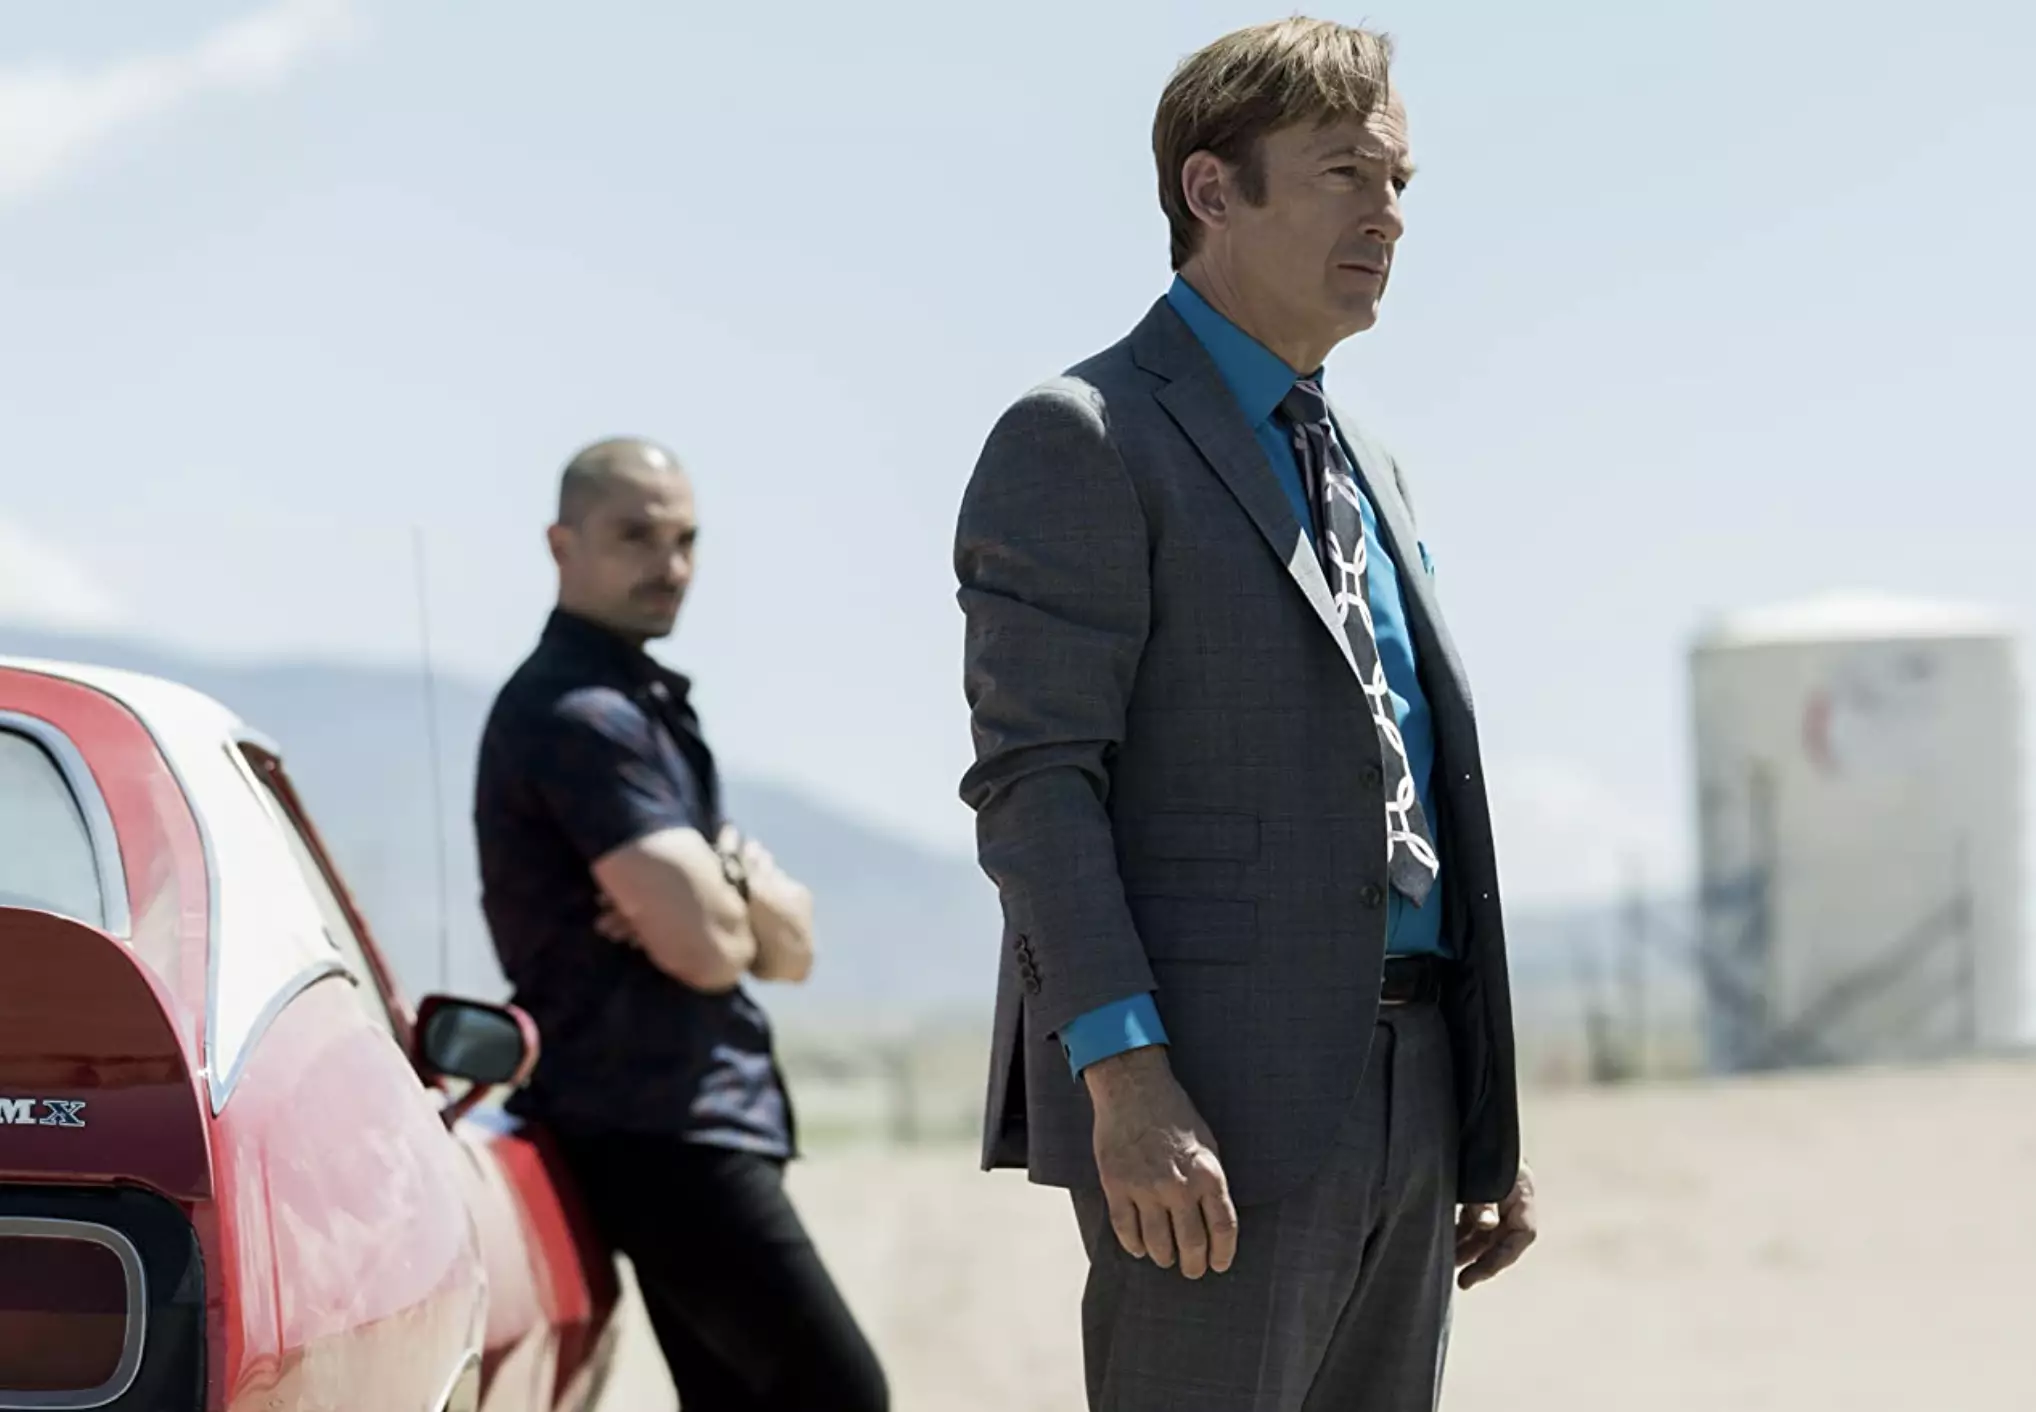 Odenkirk is best known for his role as Saul Goodman in Breaking Bad and Better Call Saul.